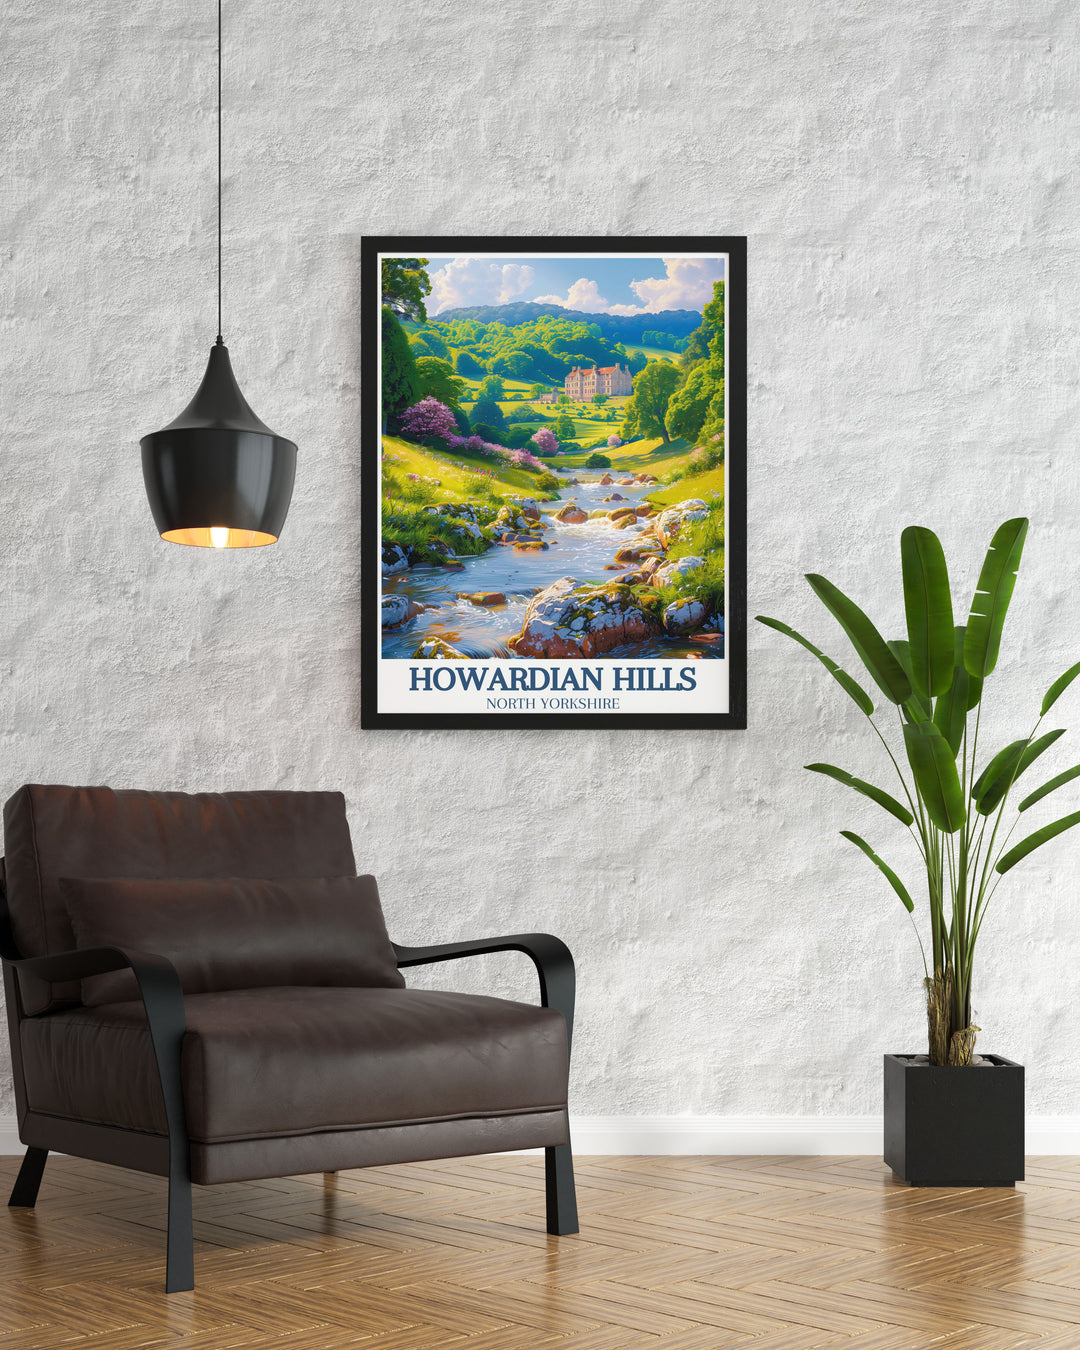 Gallery wall art of Nunnington Hall, featuring its historic charm and beautifully preserved interiors. This piece offers a glimpse into Englands rich heritage, making it a standout feature in any collection of historical art.